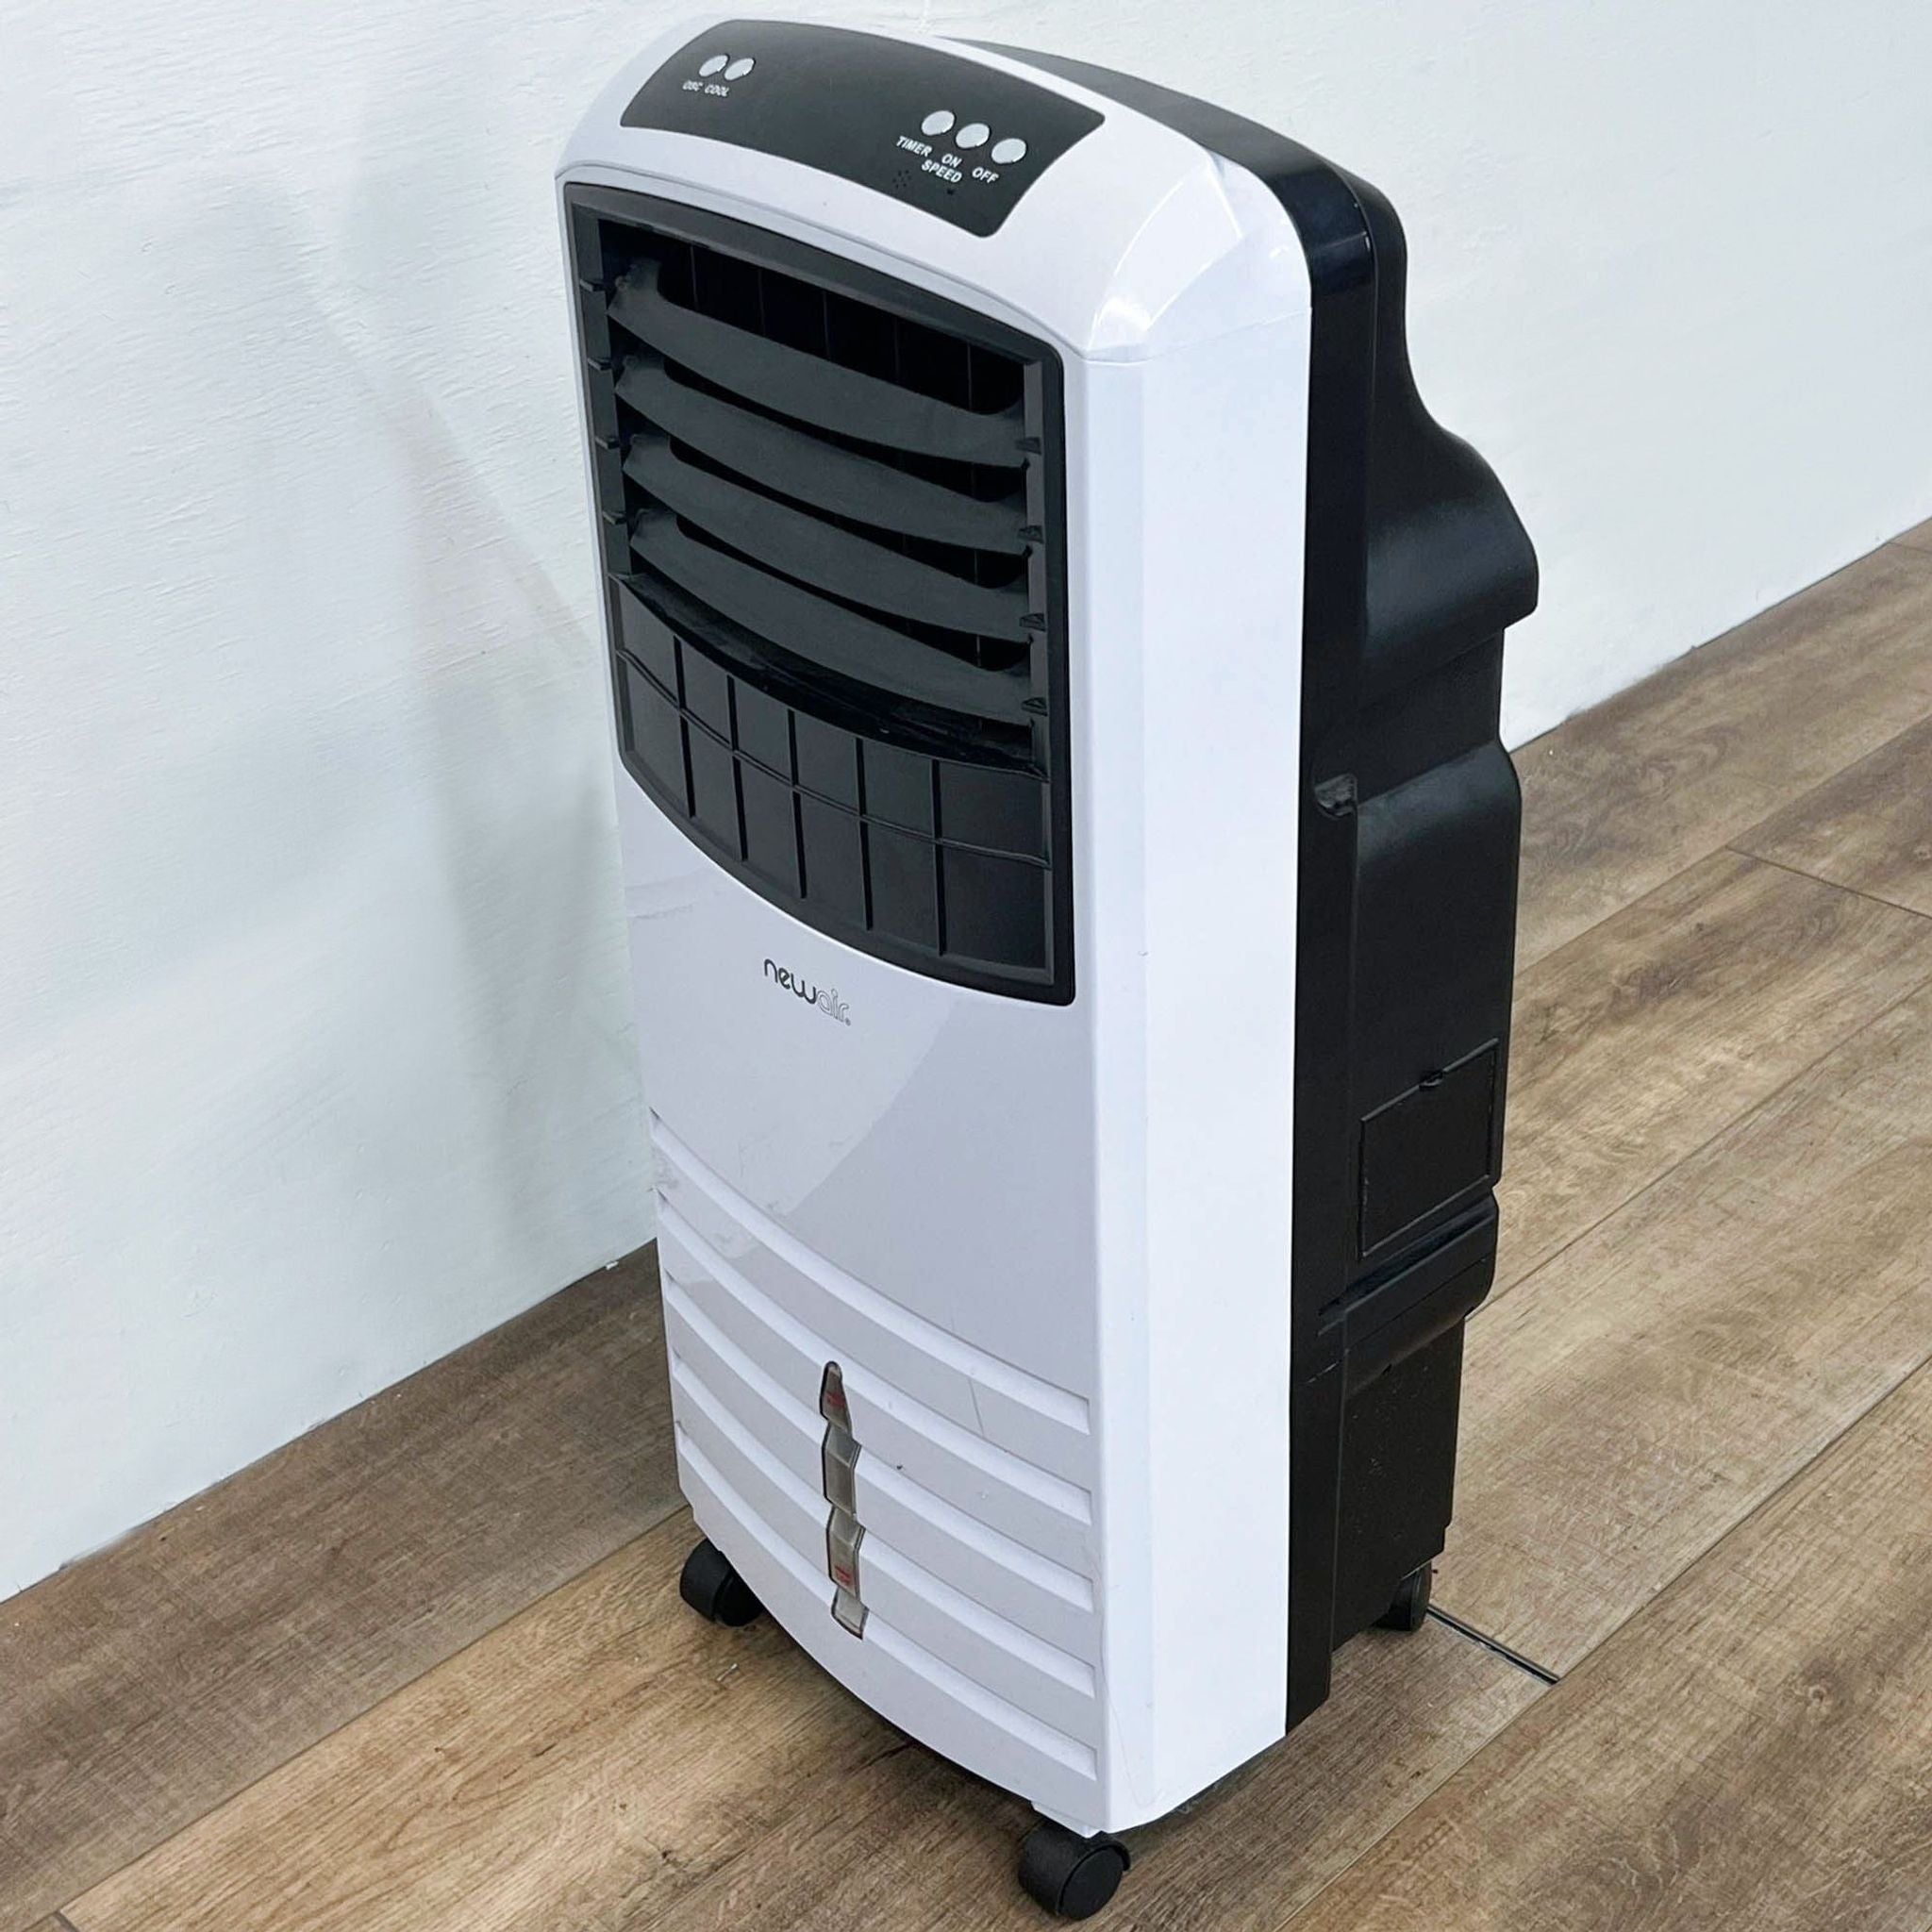 Alt text: NewAir portable air conditioner in white and black with control panel, on a wooden floor against a white wall.